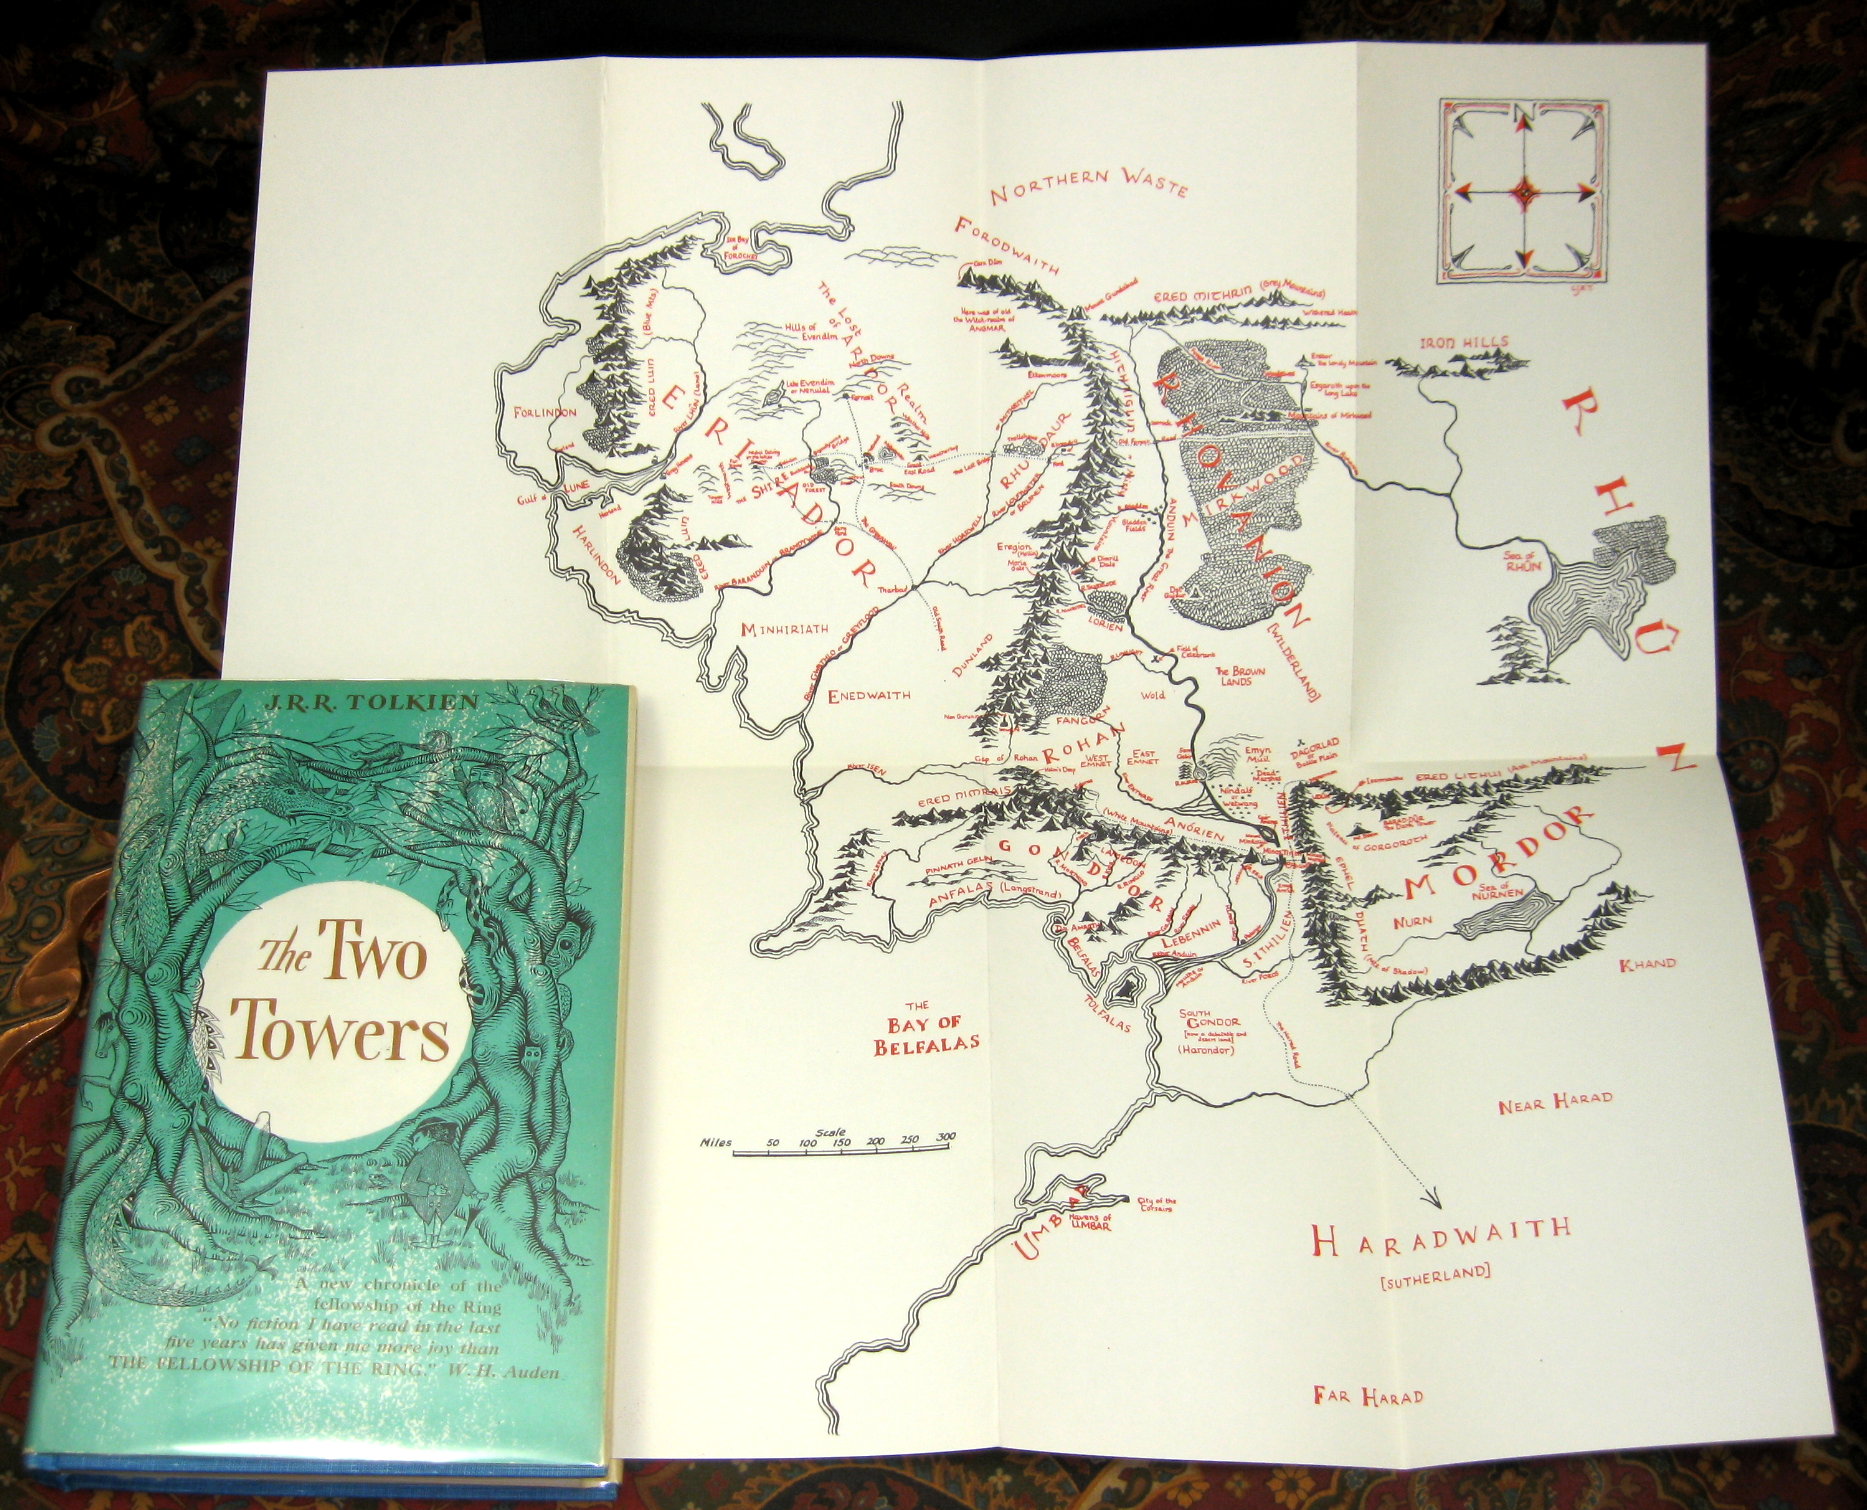 The Lord of the Rings, Comprised of the Fellowship of the Ring, The Two Towers, and The Return of the King, 1st US Editions